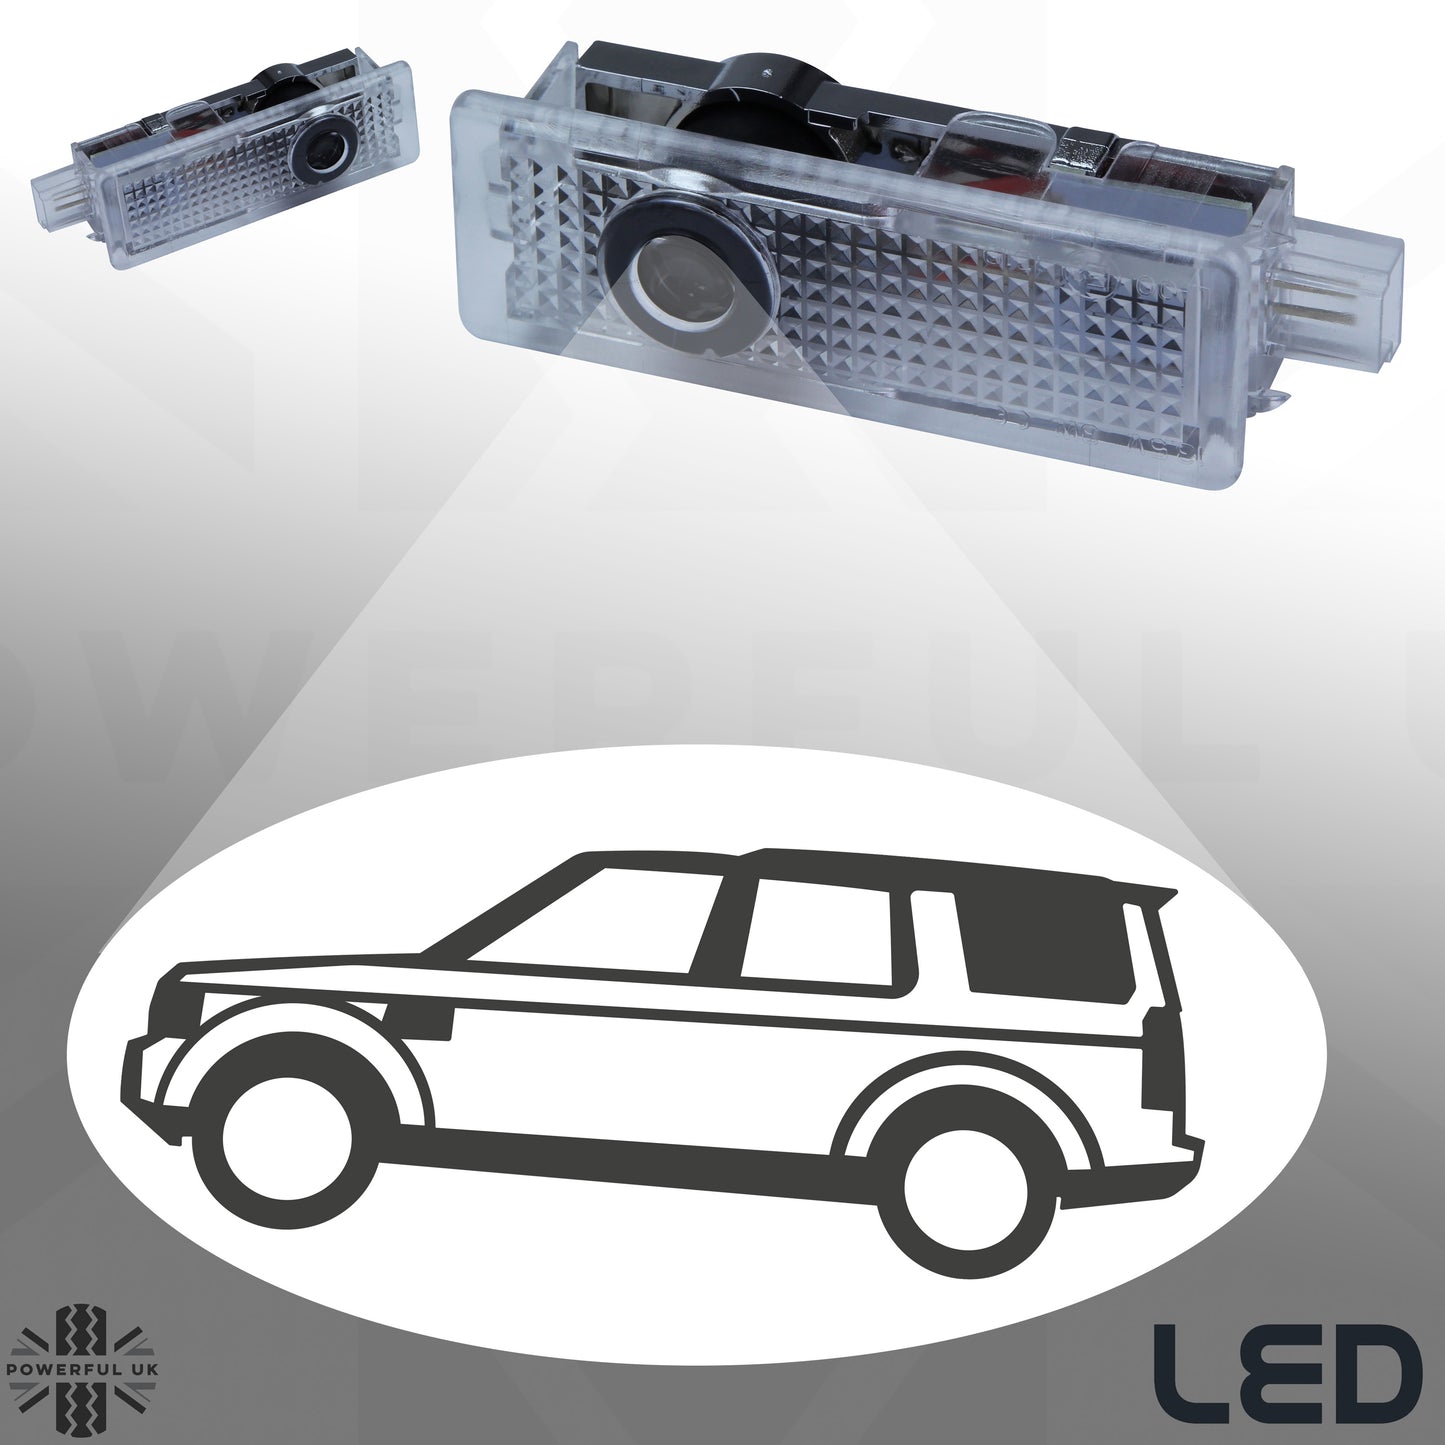 LED puddle Logo Lamp for Land Rover Discovery 3 & 4